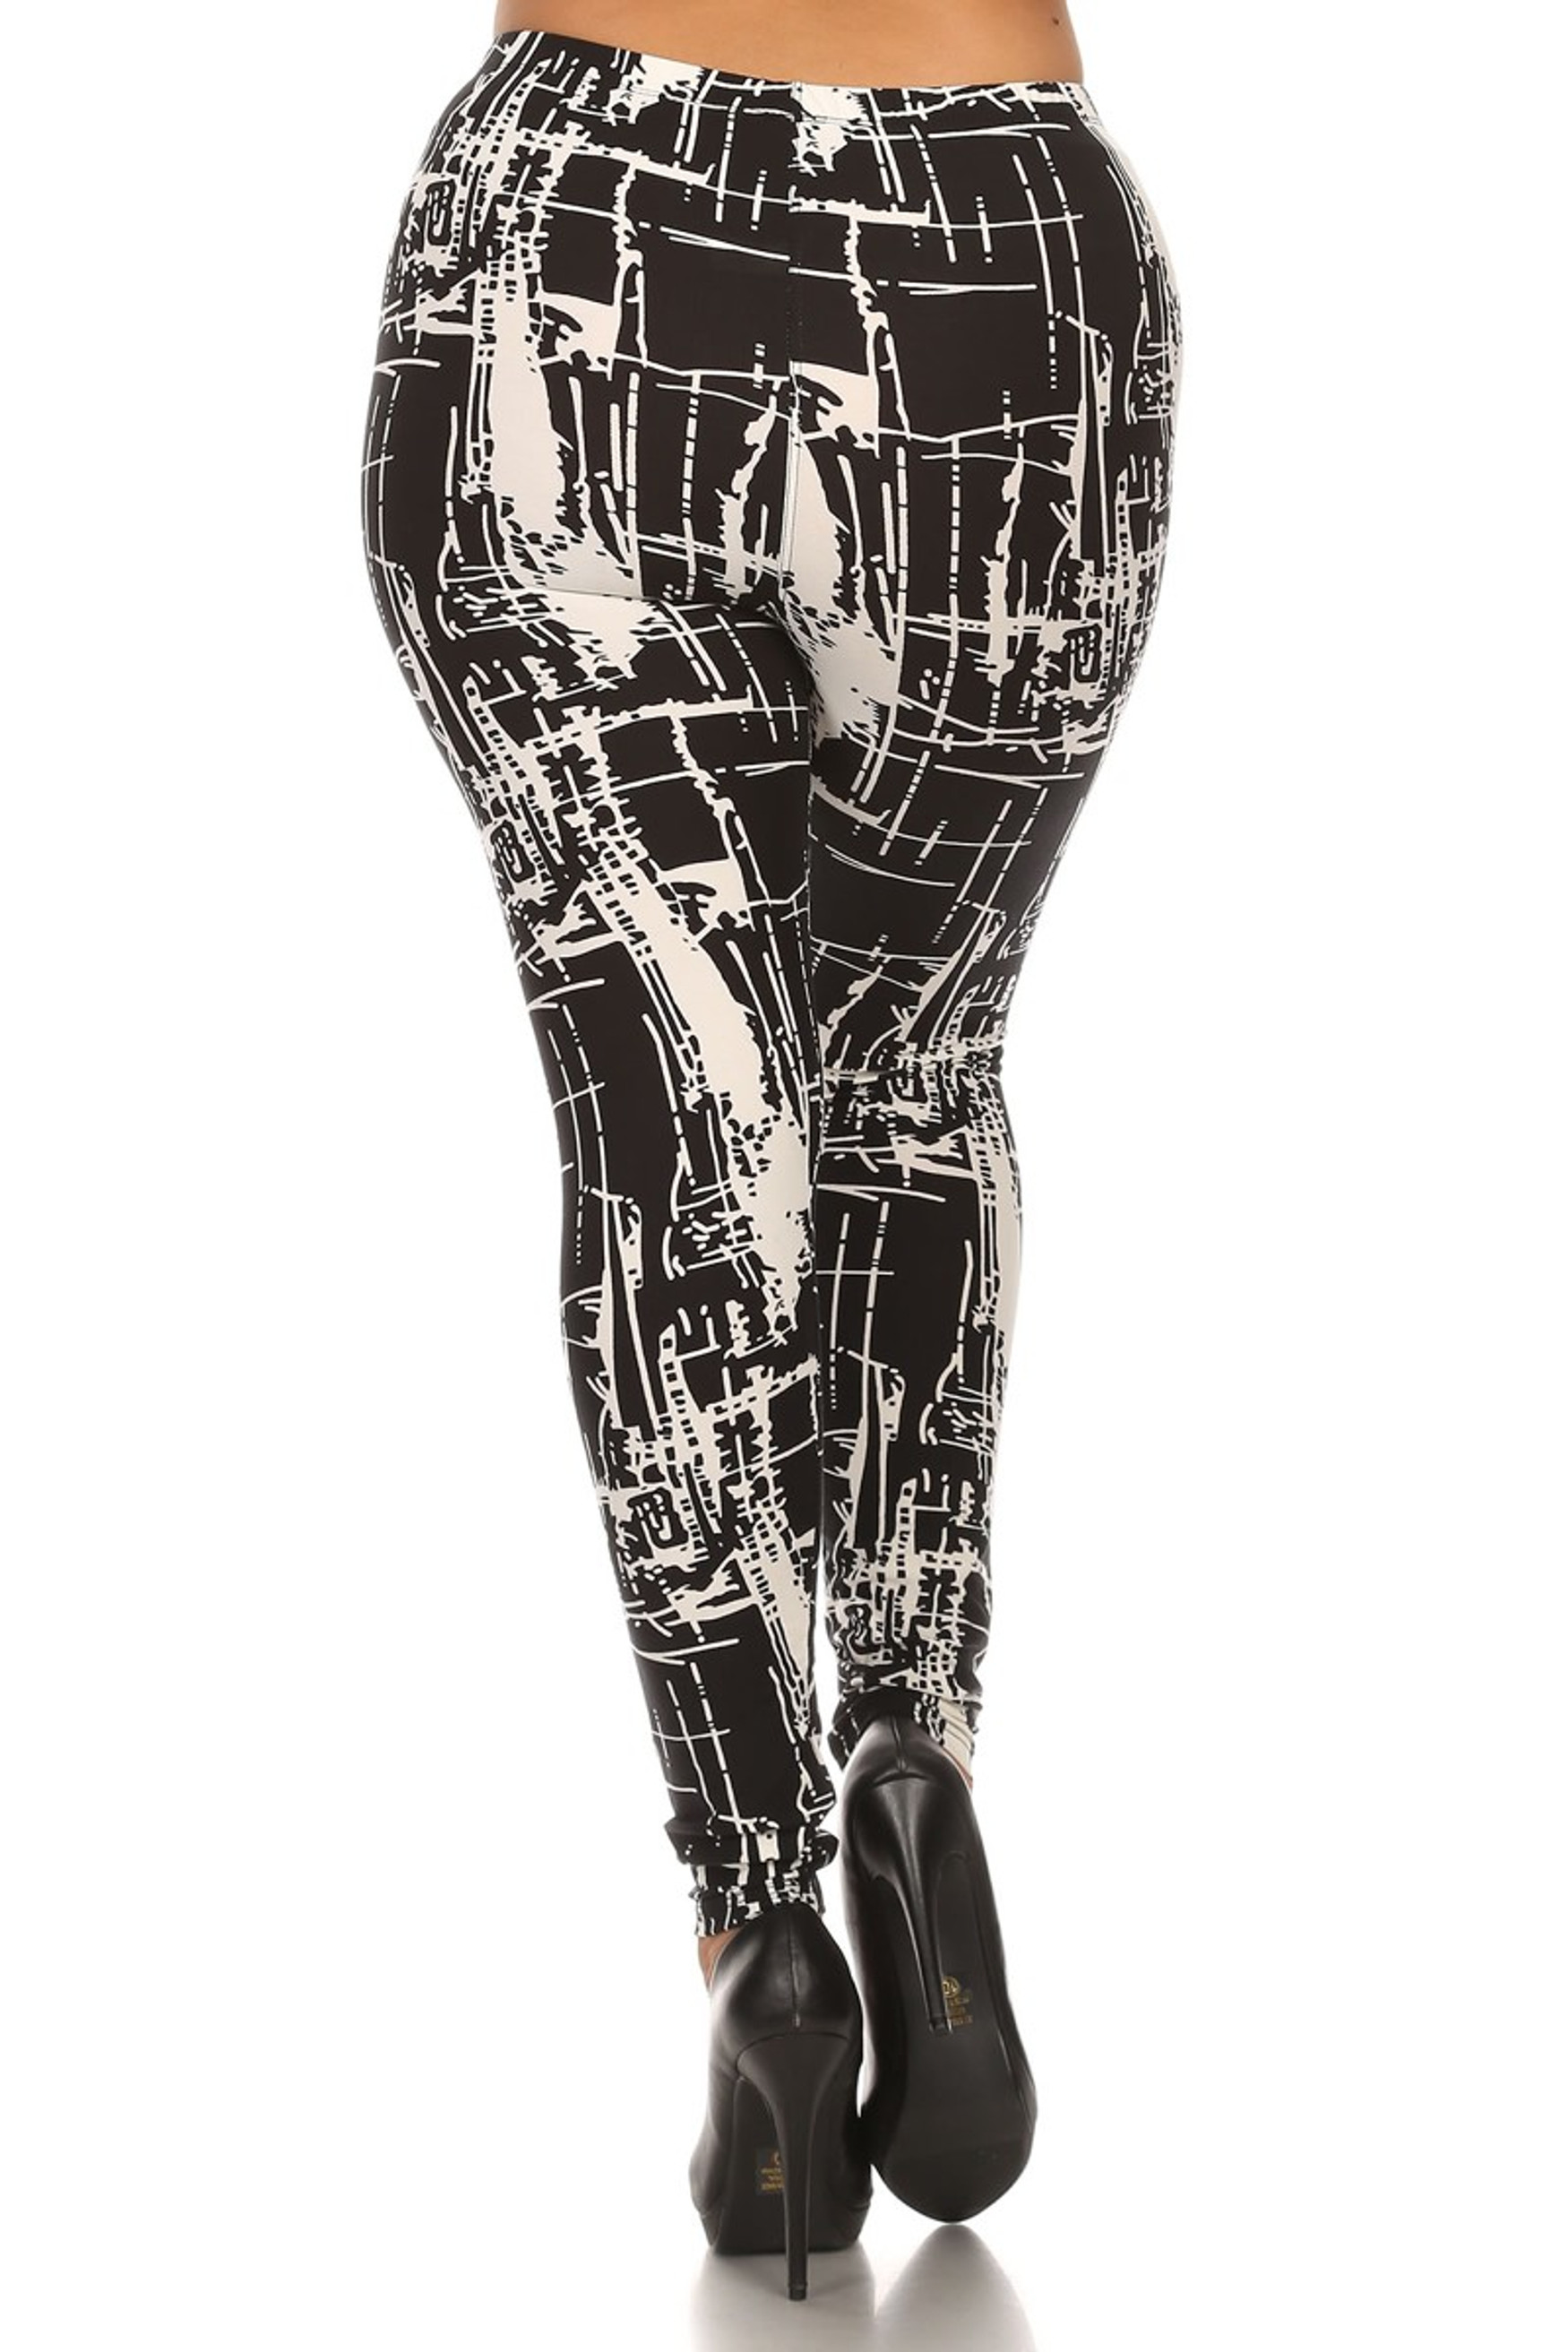 Buttery Soft Splattered Lines Extra Plus Size Leggings - 3X-5X